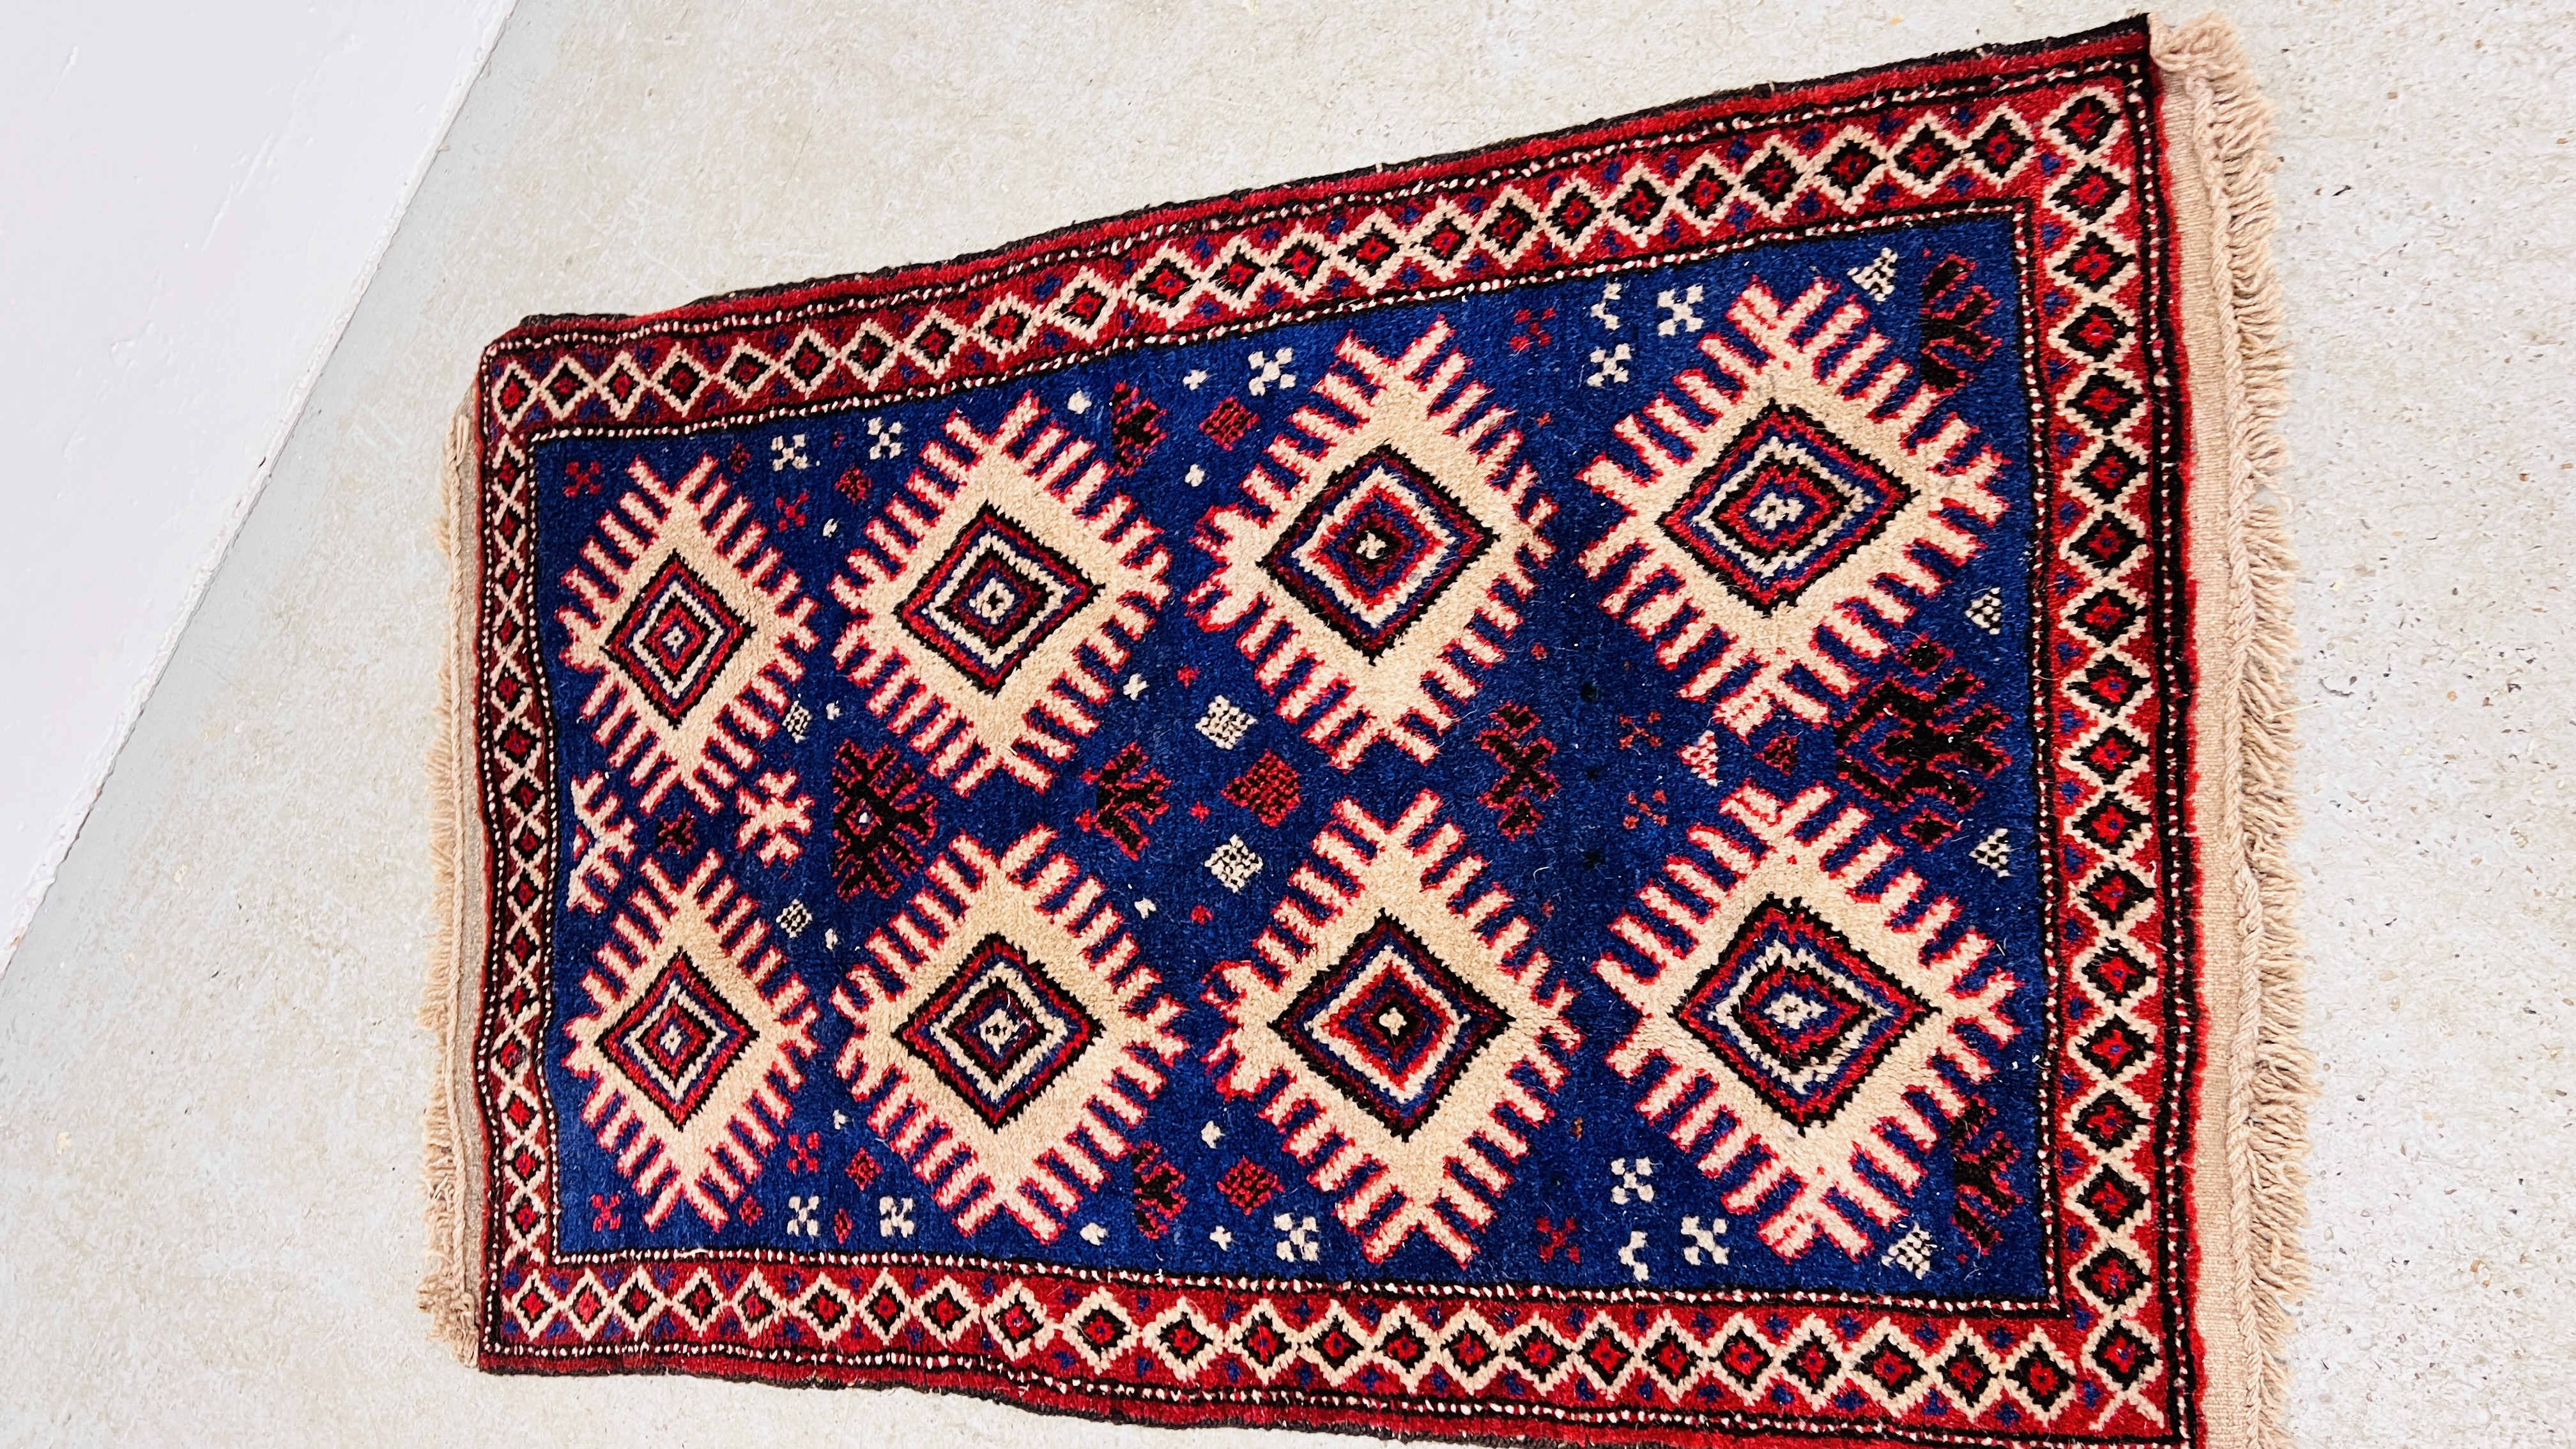 TWO RED / BLUE PATTERNED EASTERN RUGS EACH 133CM X 86CM. - Image 2 of 10